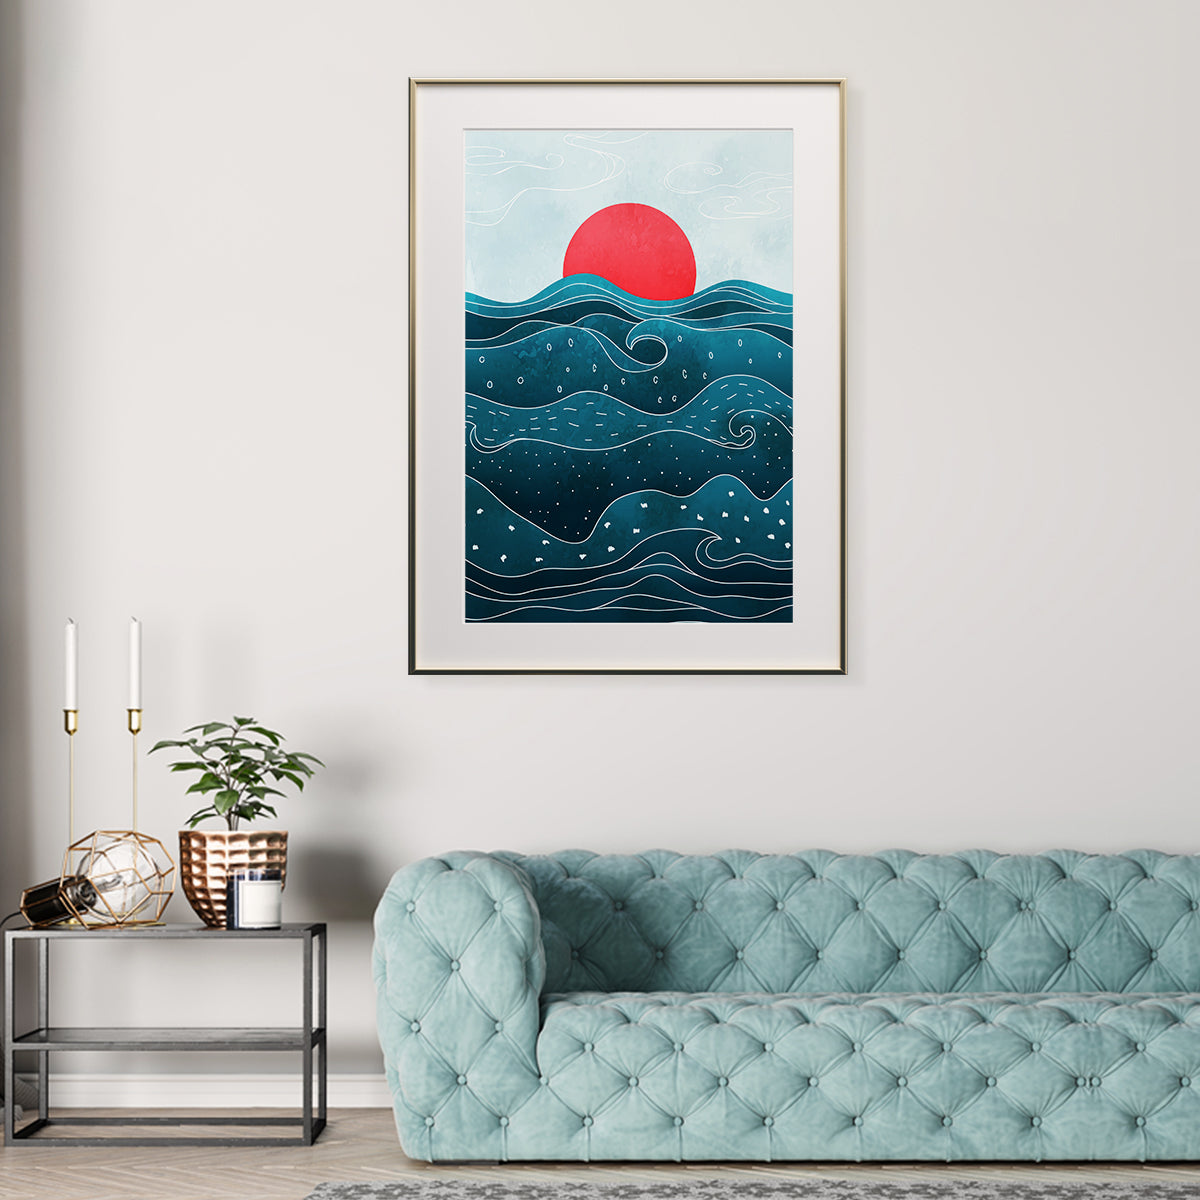 Red Sun in Blue Sea Waves Posters Wall Art Decor Japanese Style-Vertical Posters NOT FRAMED-CetArt-8″x10″ inches-CetArt